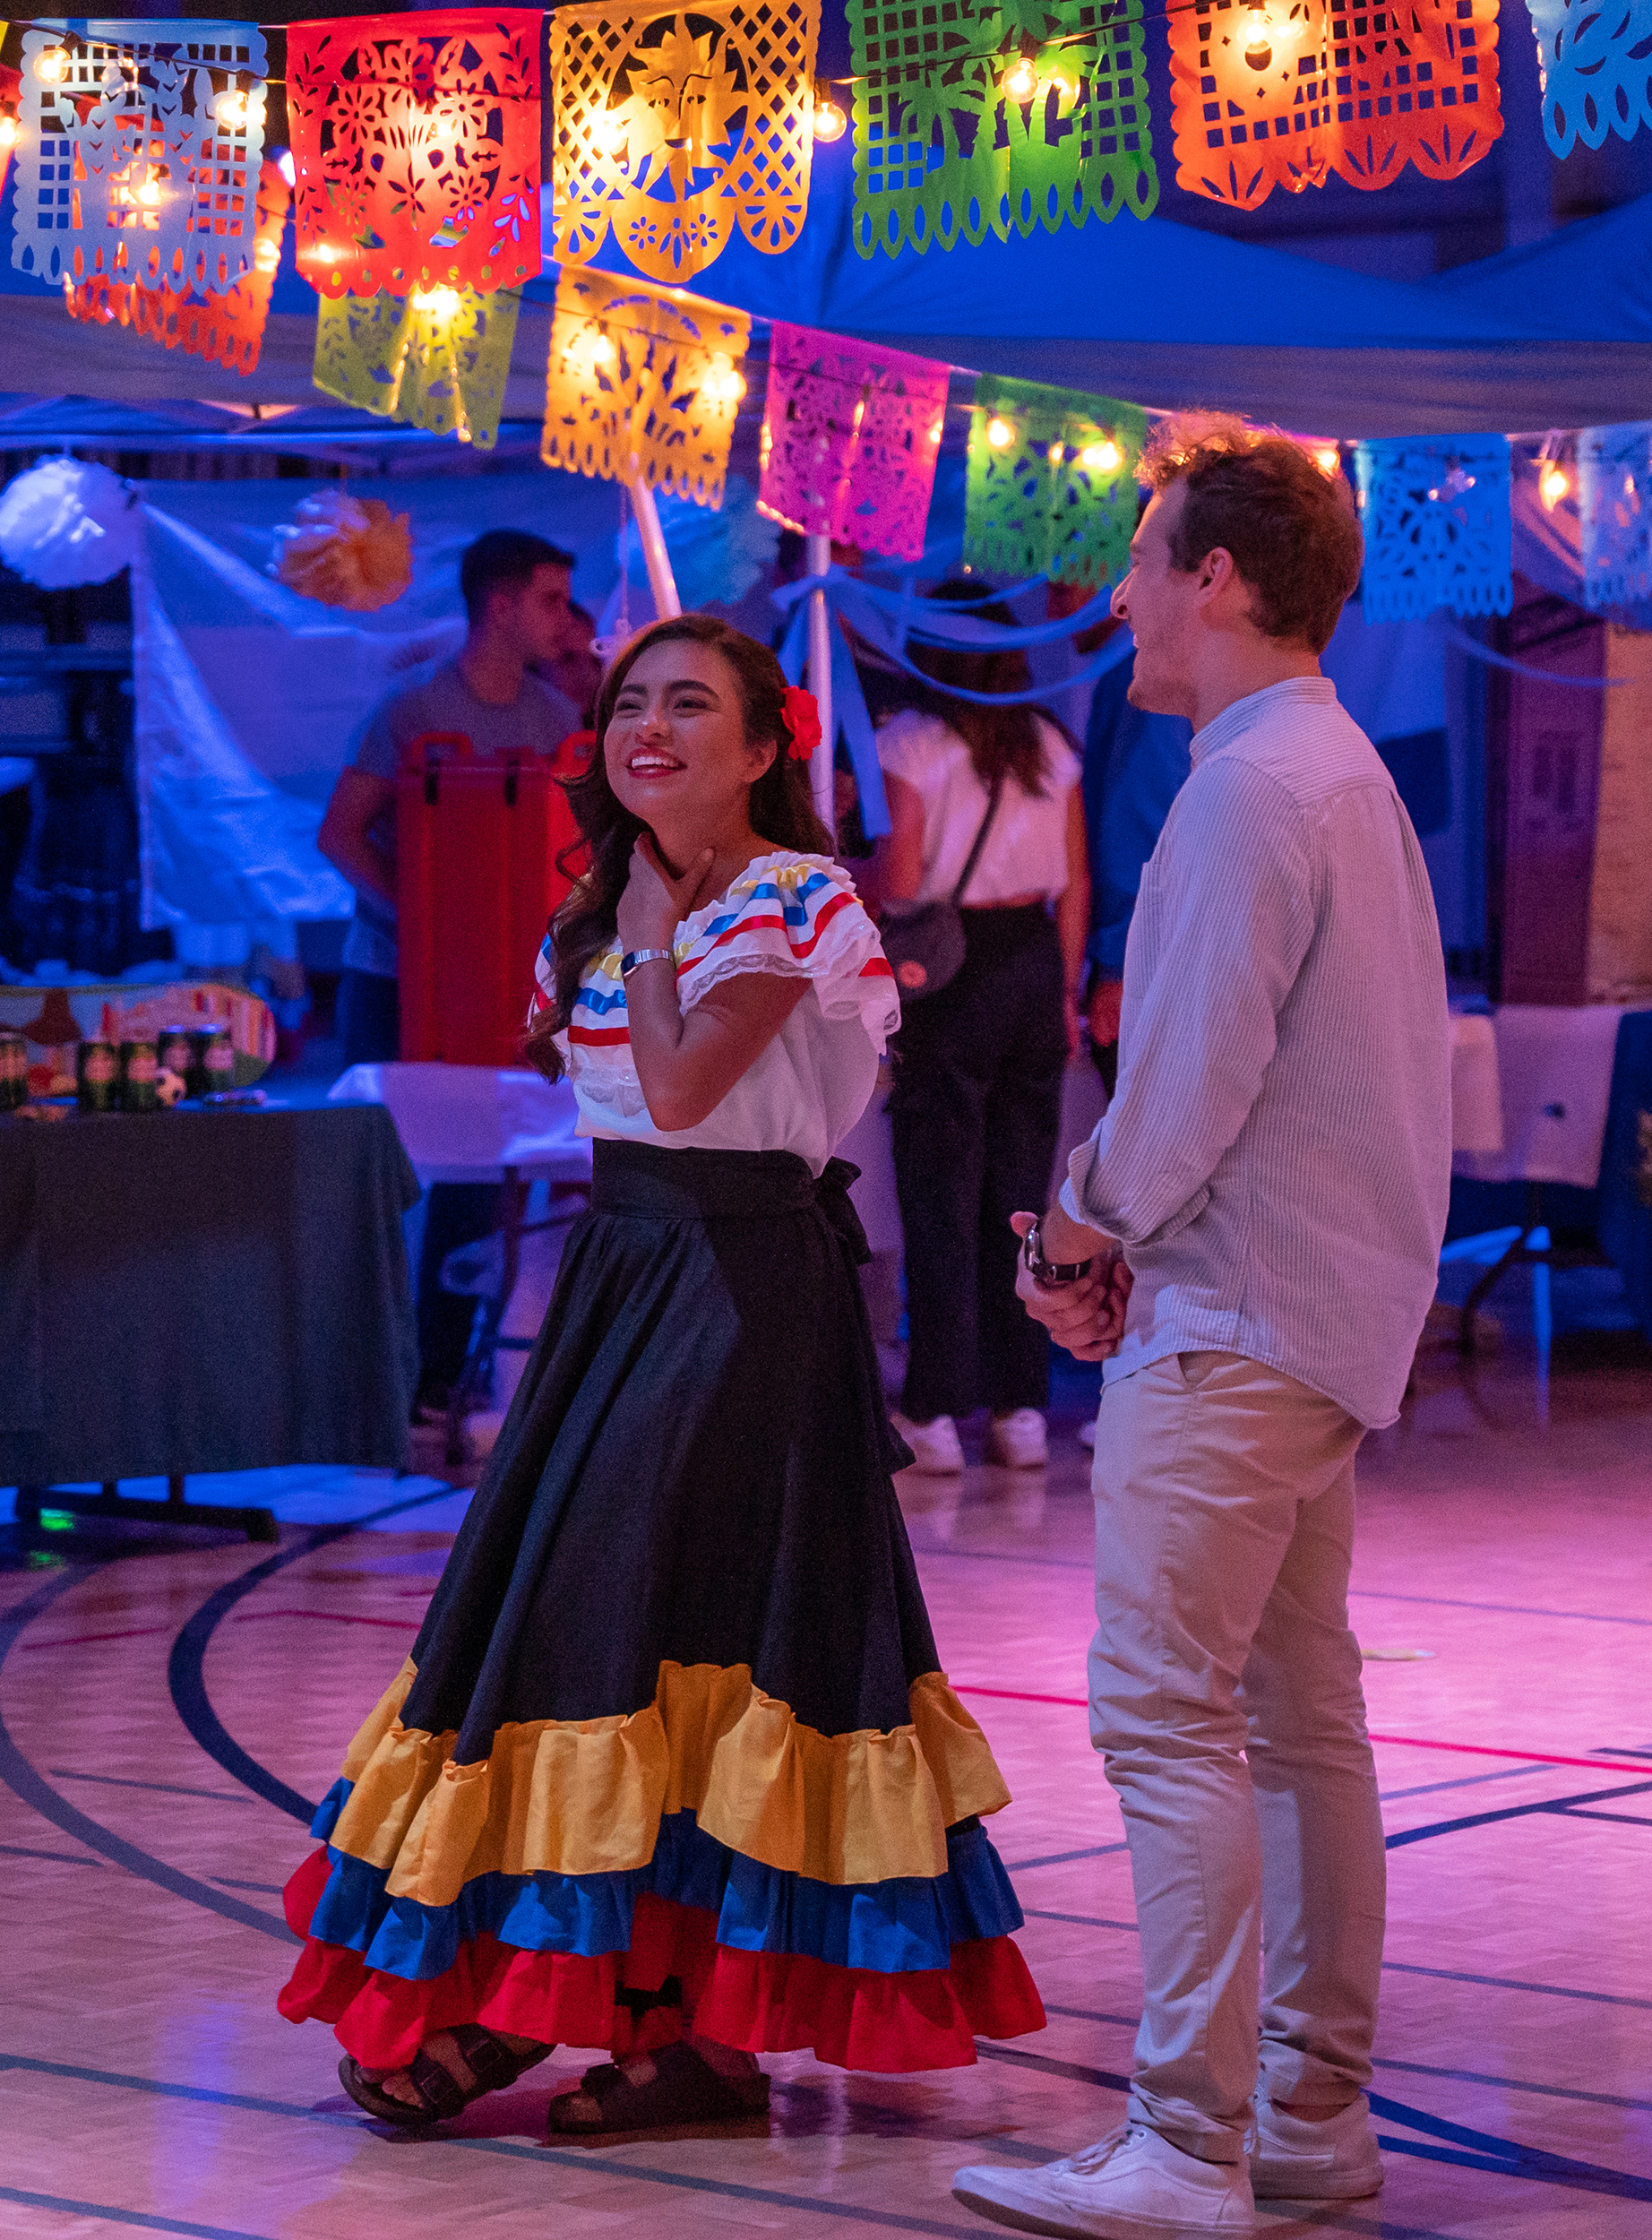 Latin American Club Night is a vibrant annual cultural celebration at Southern, which is the only official Hispanic-Serving Institution in Tennessee.